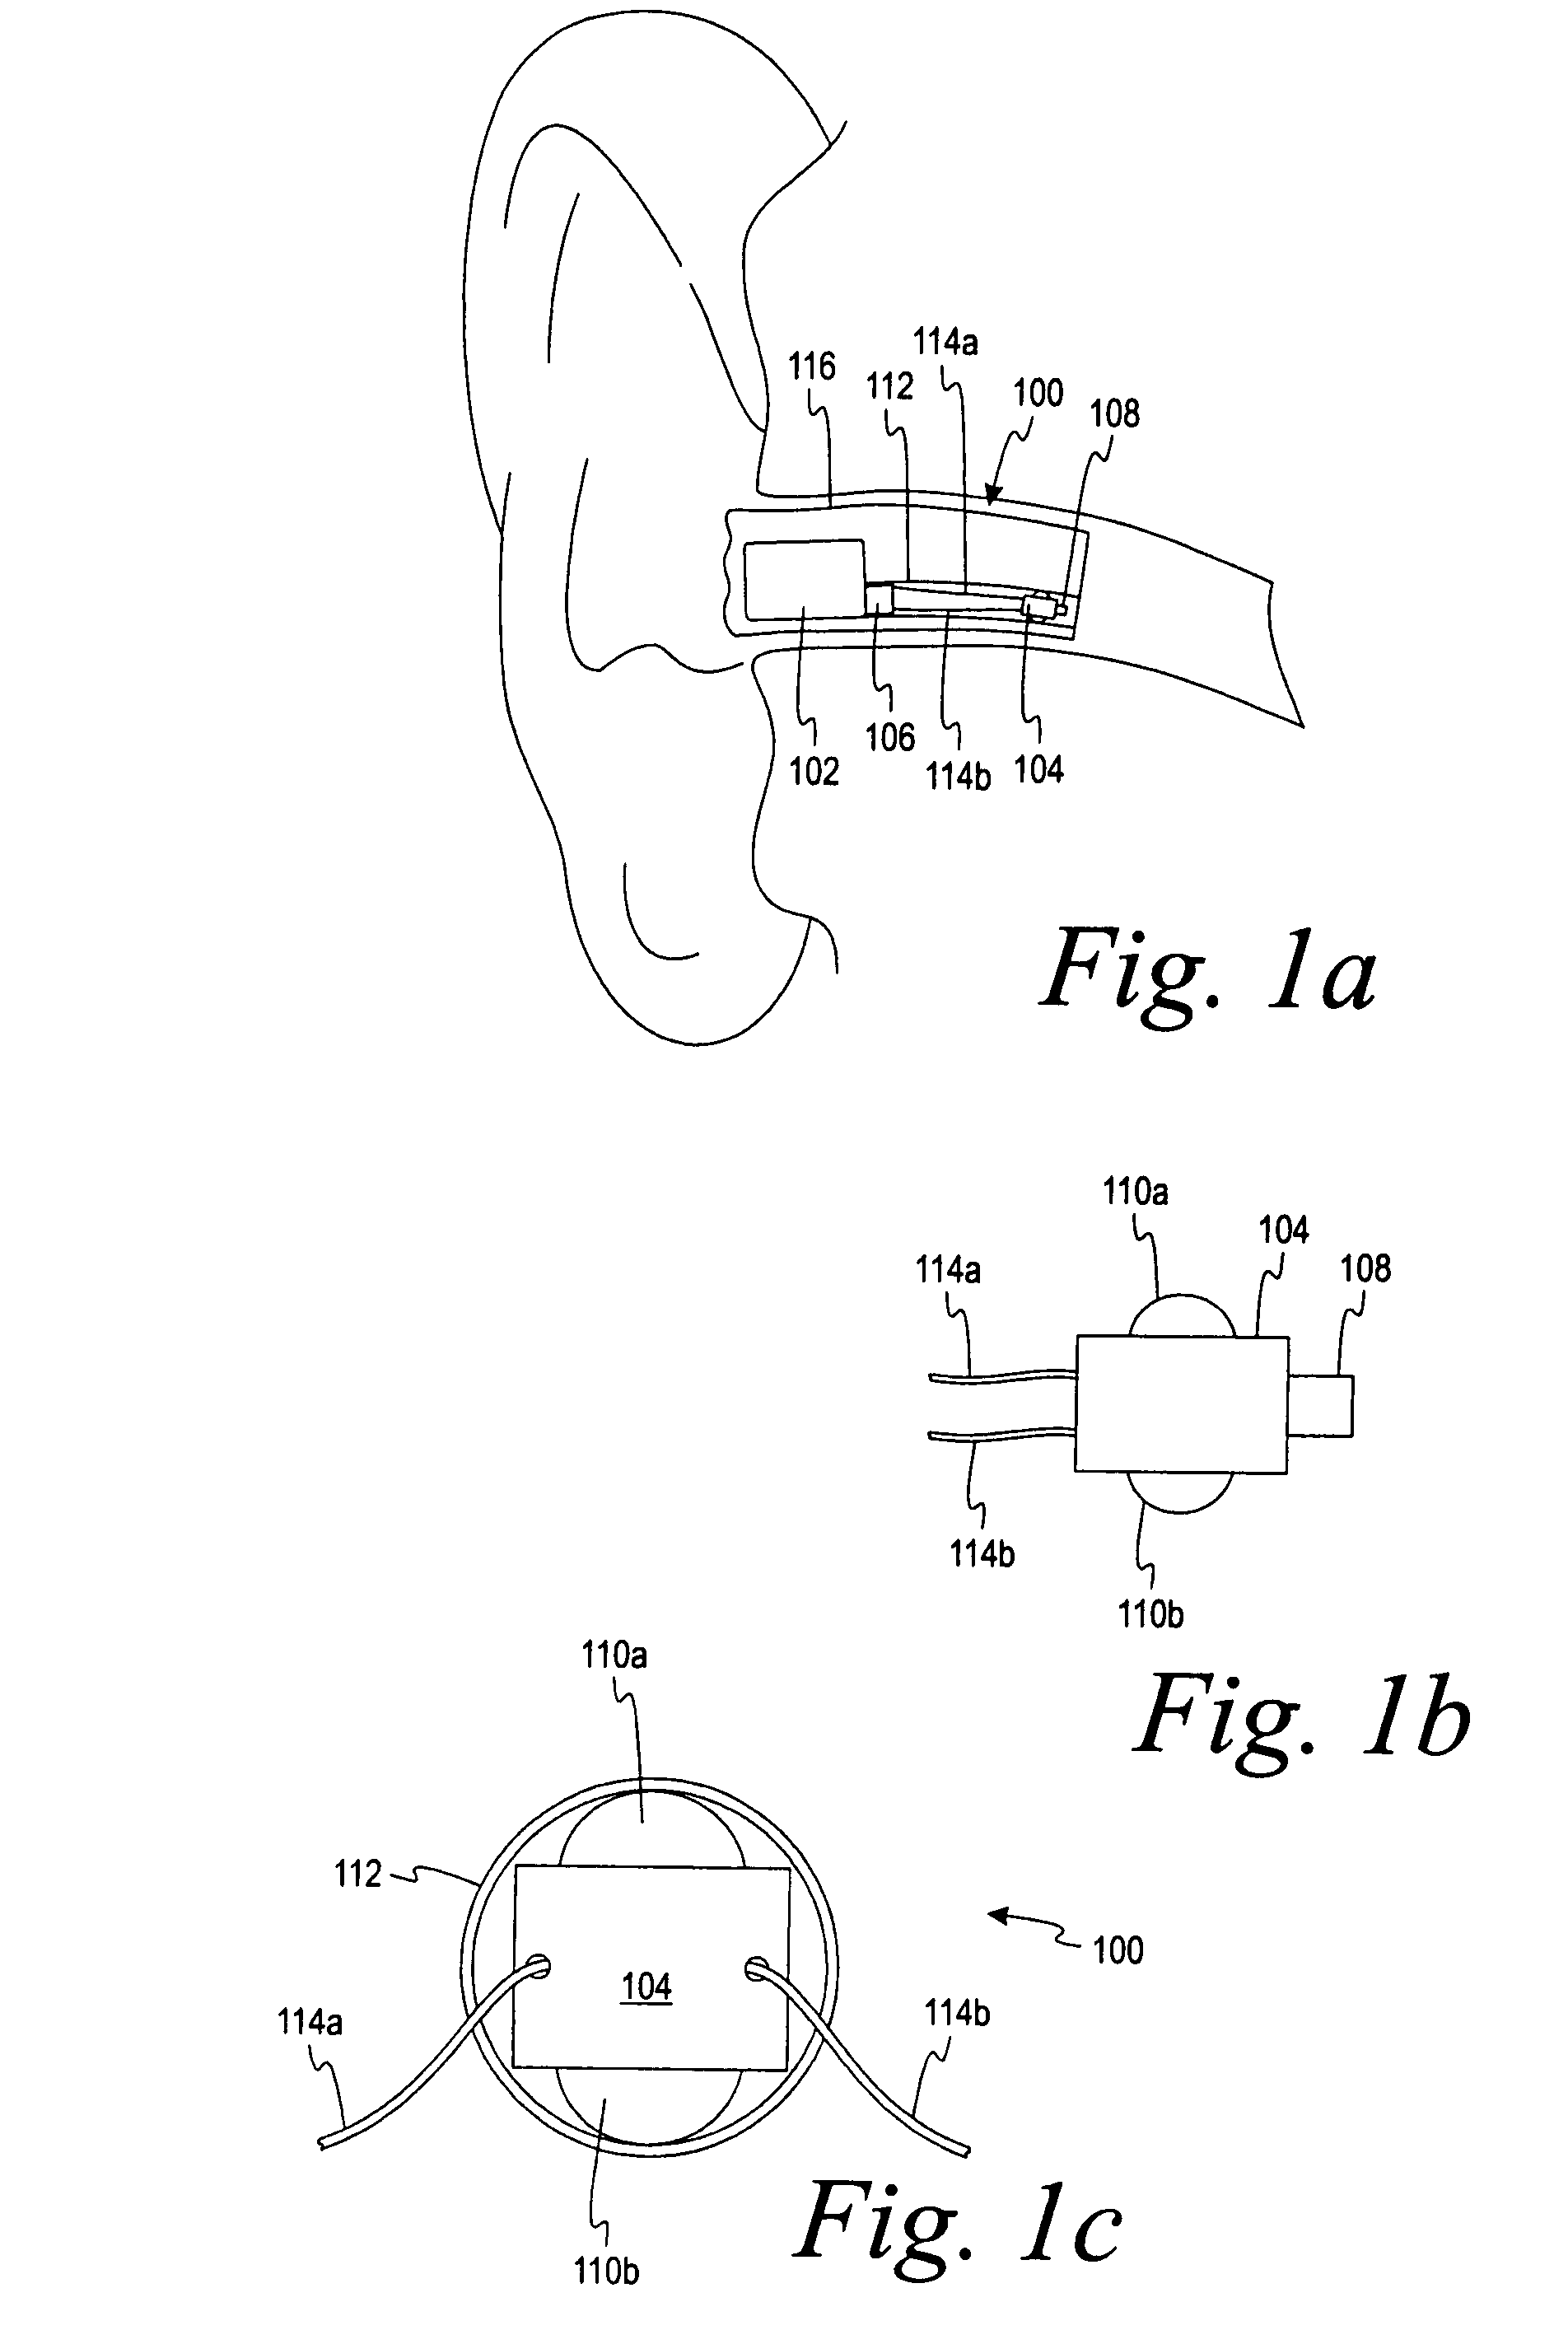 Hearing aid having two receivers each amplifying a different frequency range